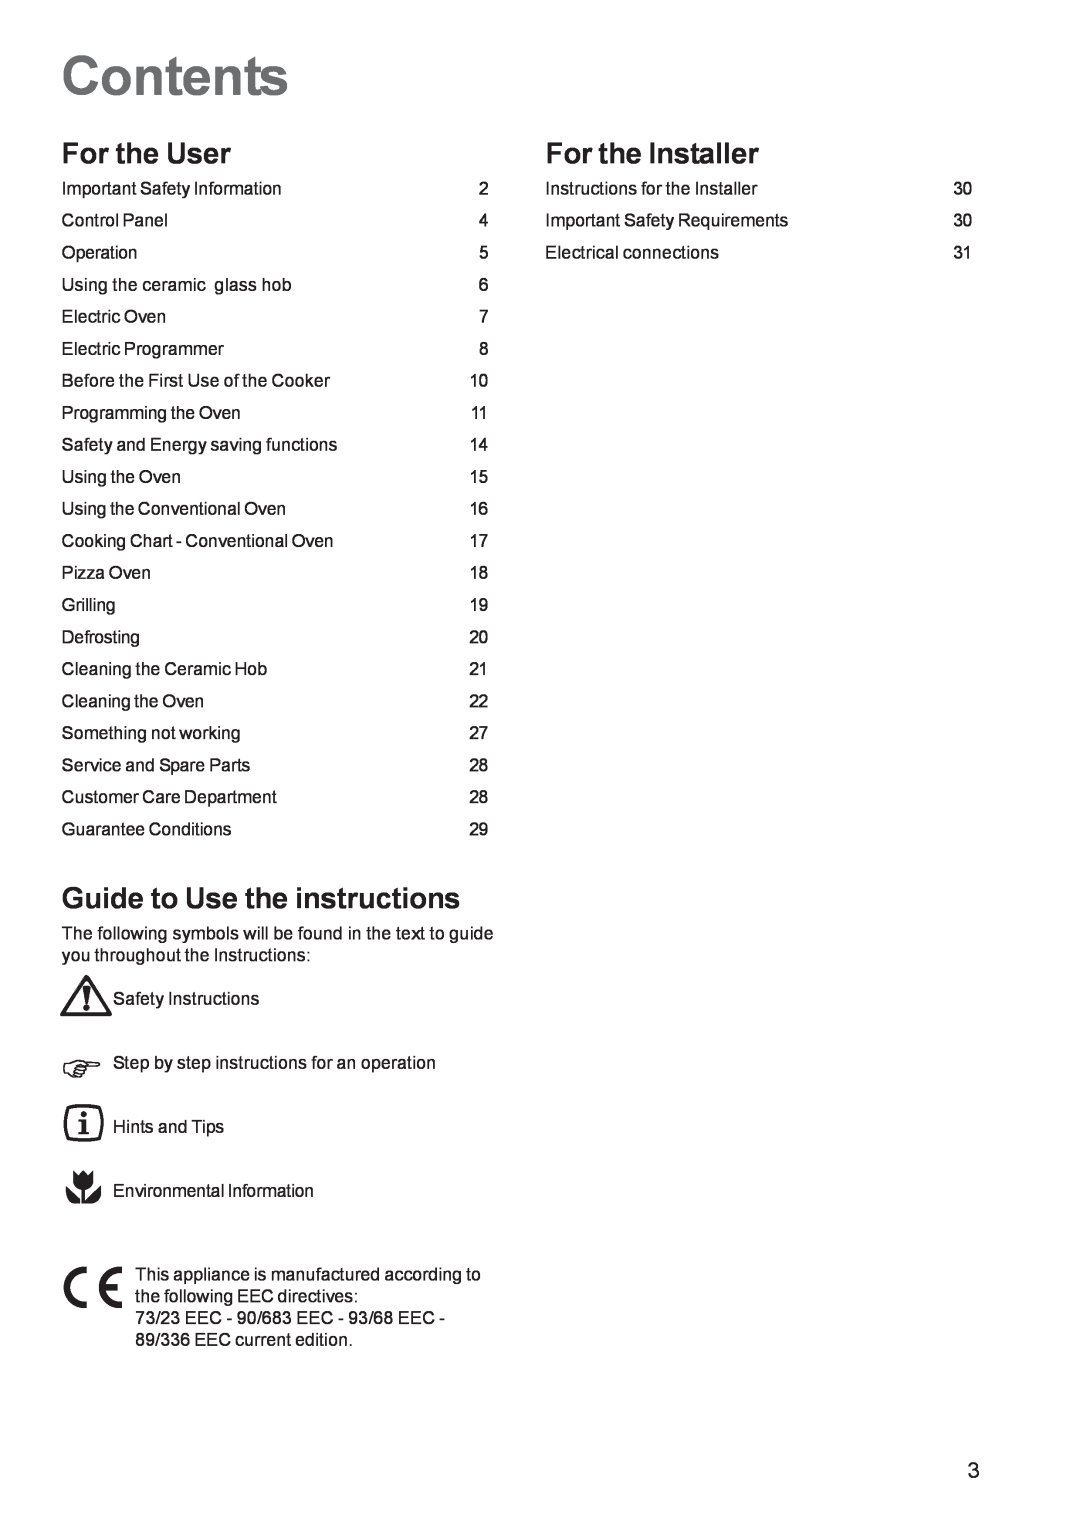 Zanussi ZCE 651, ZCE 650 manual Contents, For the User, For the Installer, Guide to Use the instructions 